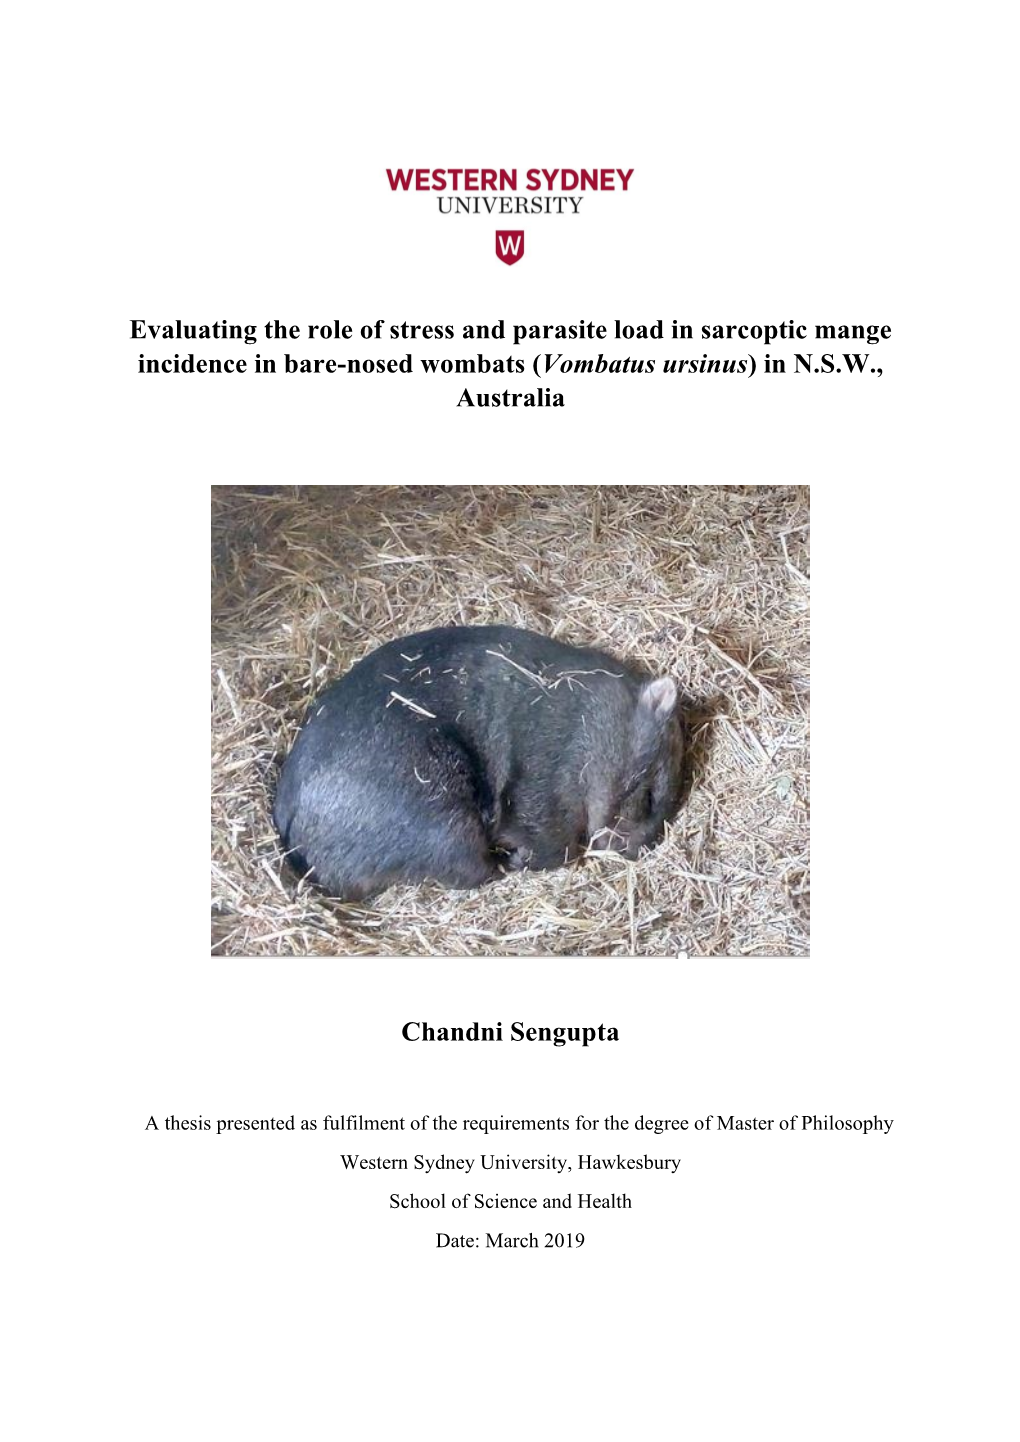 Evaluating the Role of Stress and Parasite Load in Sarcoptic Mange Incidence in Bare-Nosed Wombats (Vombatus Ursinus) in N.S.W., Australia